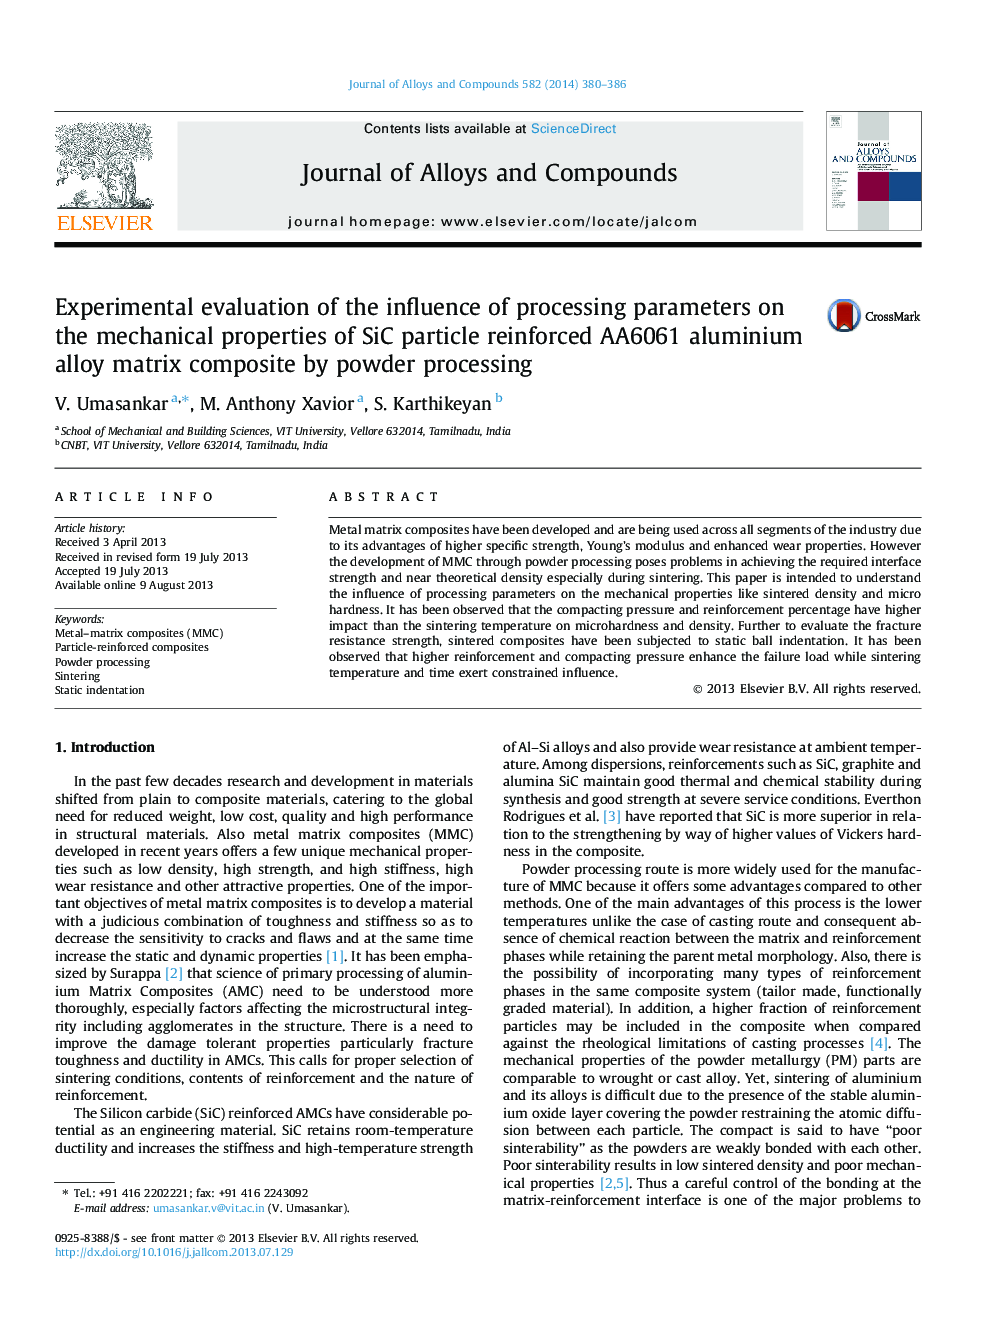 Experimental evaluation of the influence of processing parameters on the mechanical properties of SiC particle reinforced AA6061 aluminium alloy matrix composite by powder processing